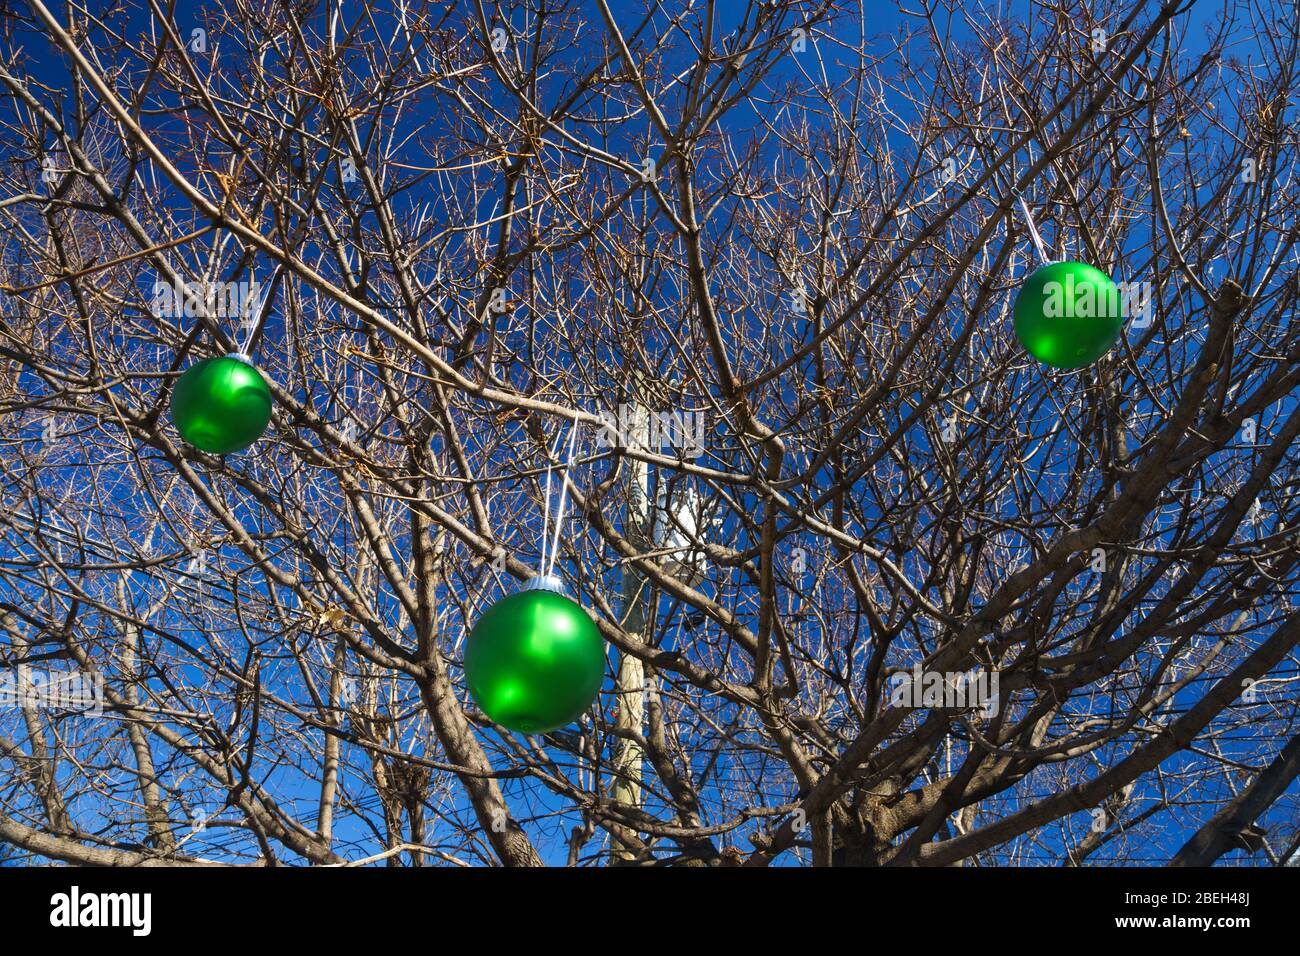 Three green Christmas baubles hanging from the bare branches of a maple tree on a sunny day. Stock Photo